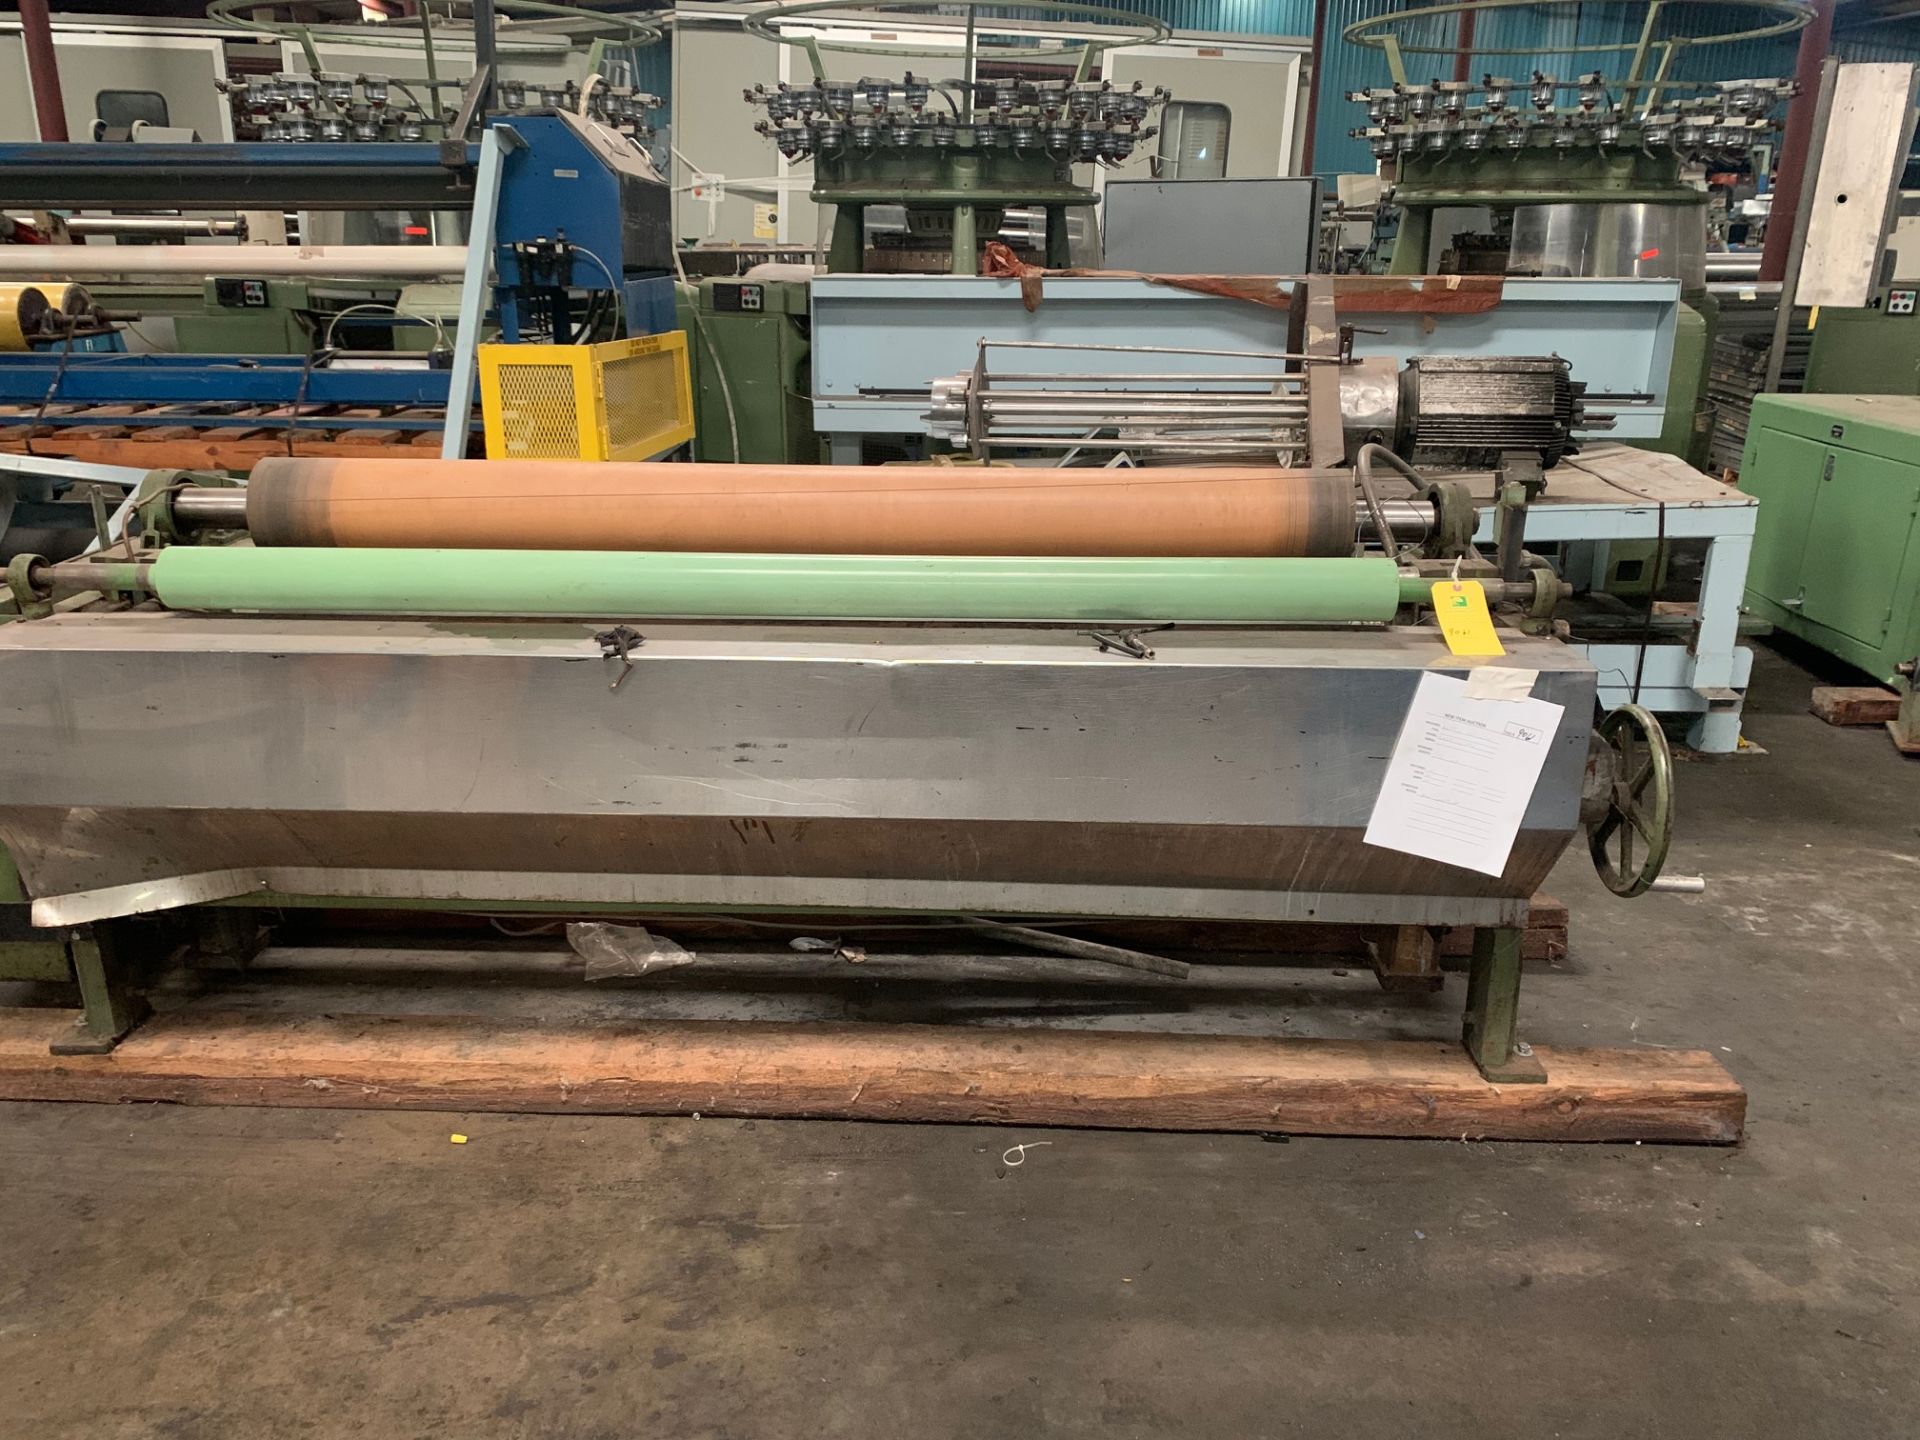 Griffin Applicator, Model# SA2R865756, Working Width 78", Rigging Fee $100